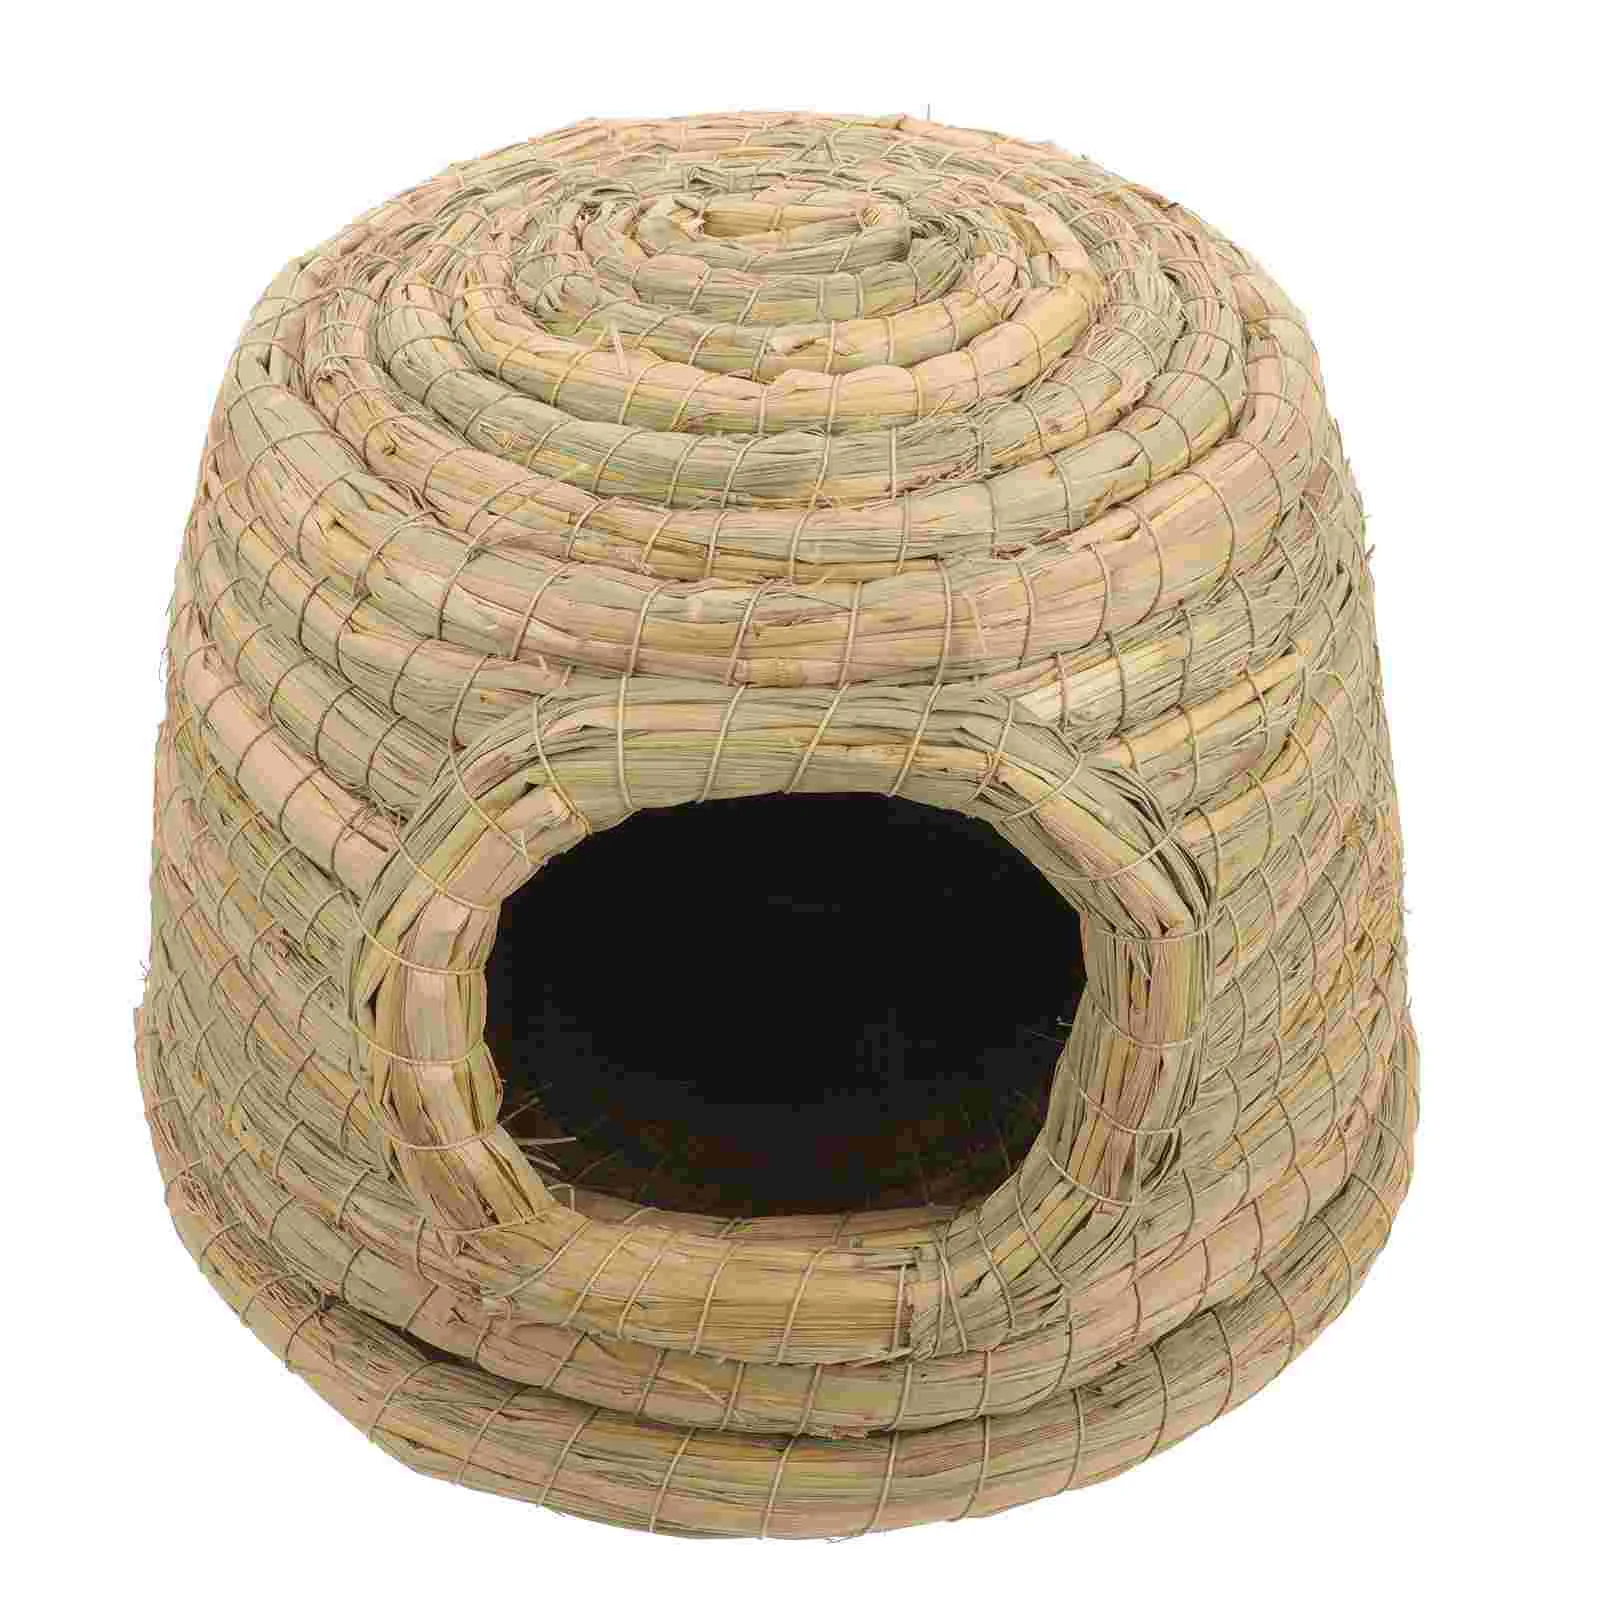 

Seat Cushion Rabbit Nest Hand Woven Bunny House Grass Hamster Hut Indoor Household Hideout